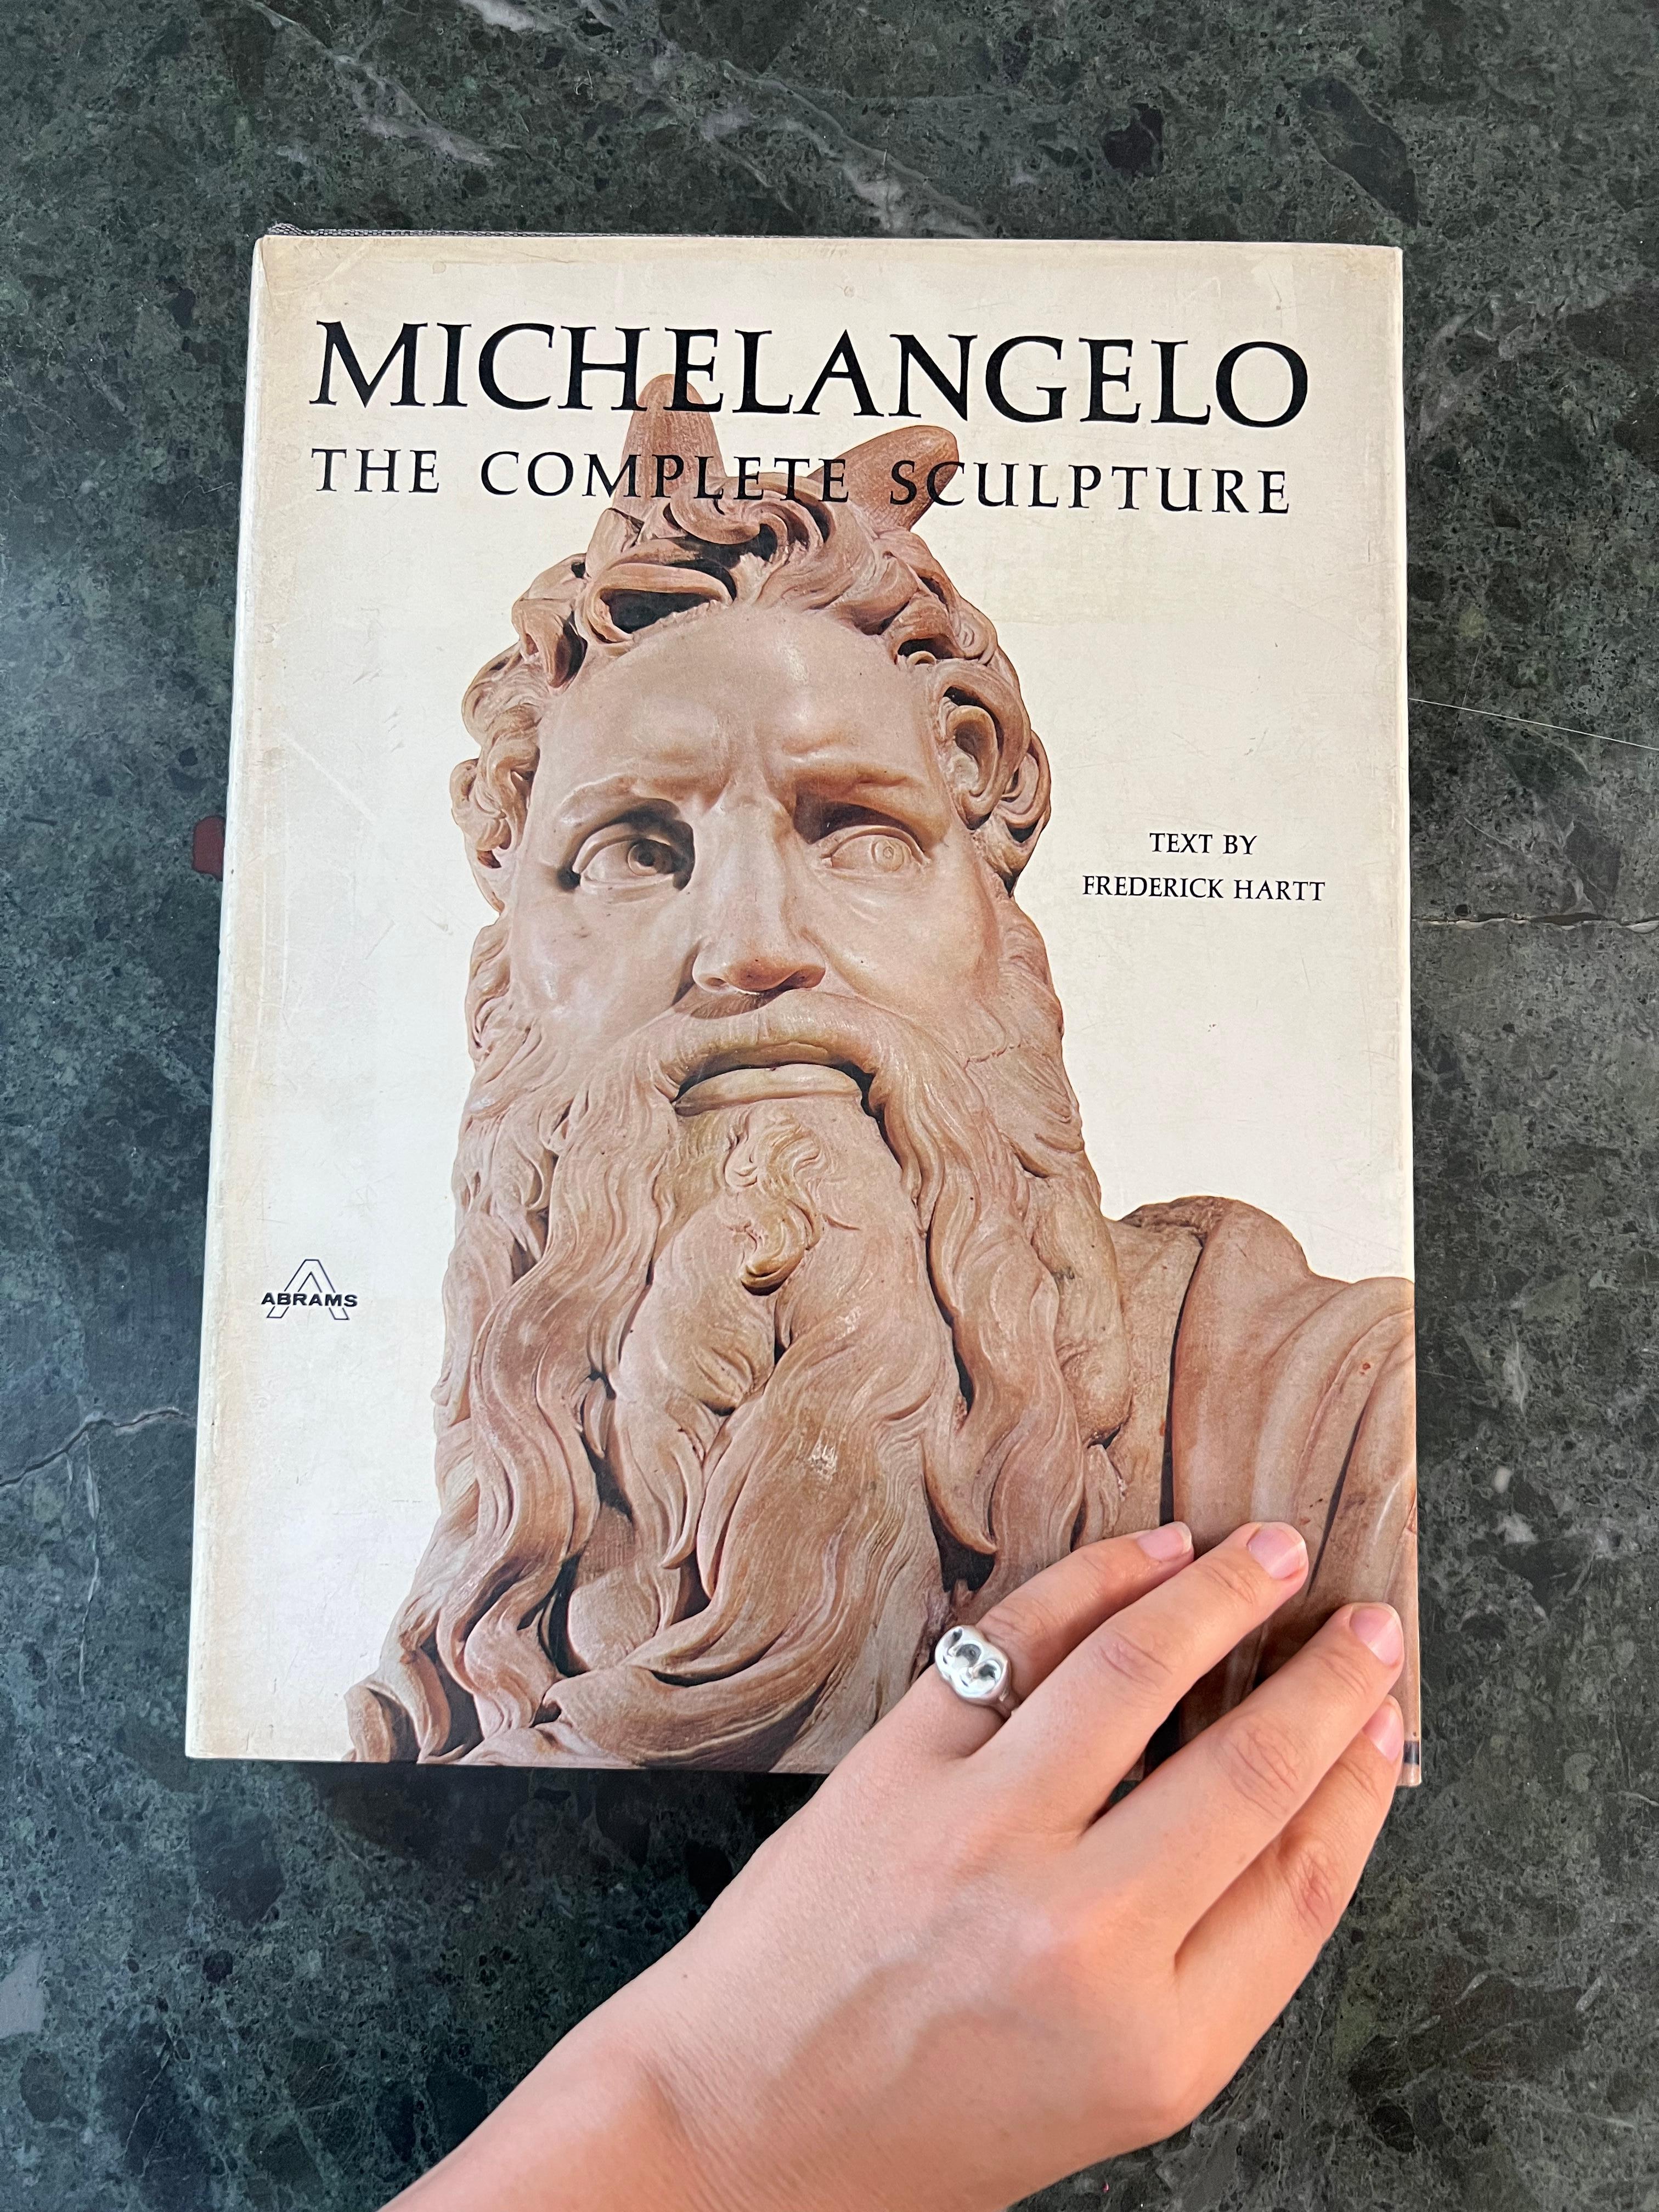 An absolutely sublime collectible coffee table book: « Michelangelo: The Complete Sculpture. » Printed and bound in Japan by Abrams, 1982. With text by Frederick Hartt (though the book hails from Japan, the text is indeed in English). For the true